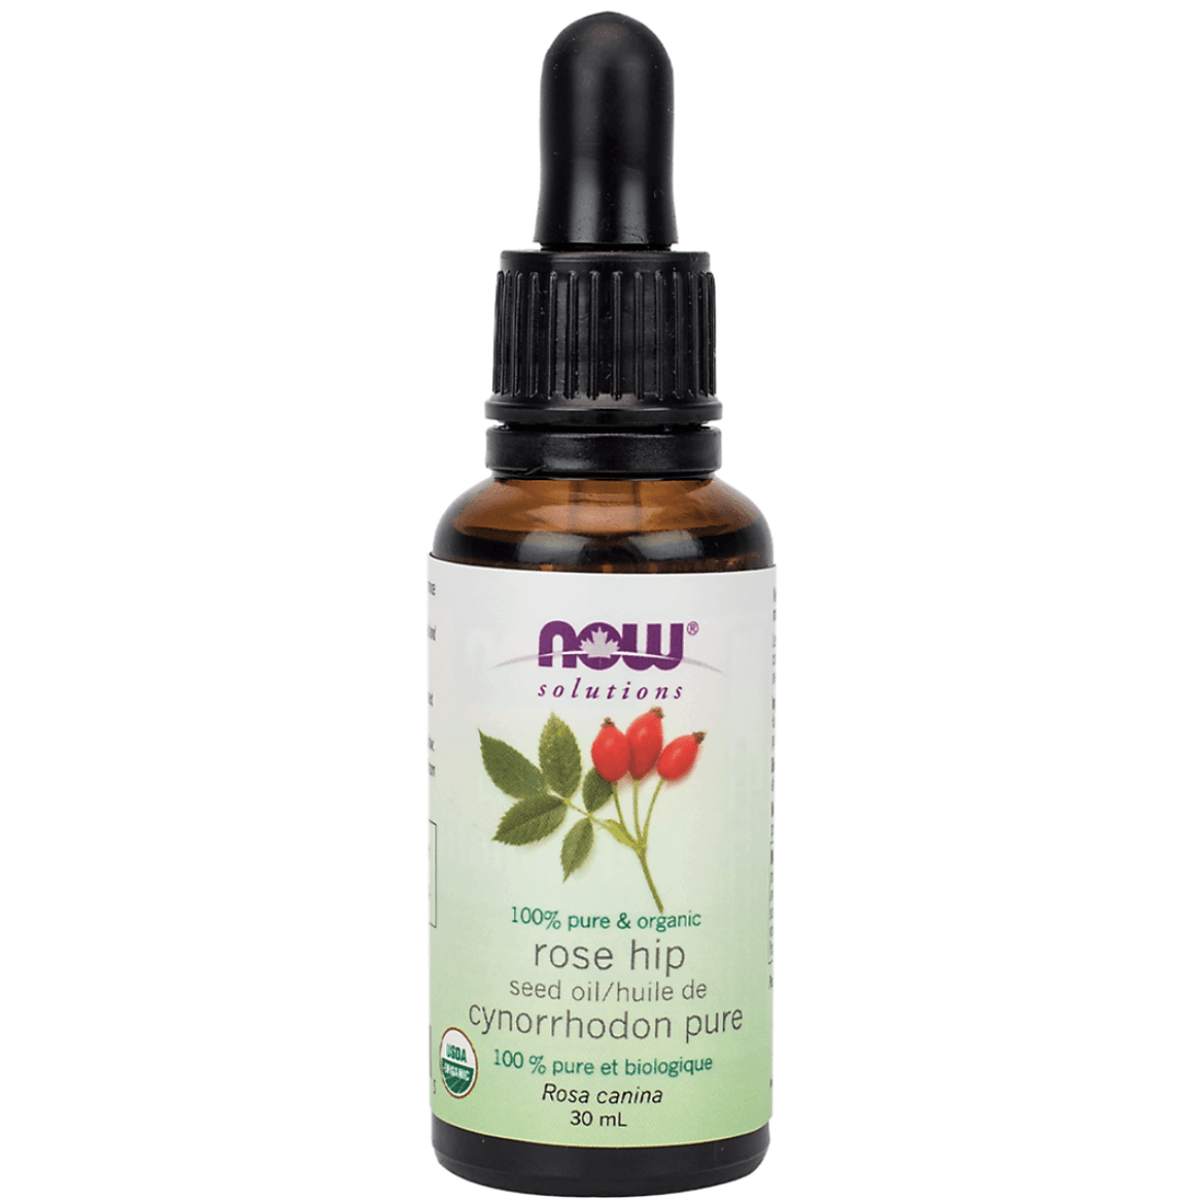 NOW Organic Rose Hip Seed Oil 30mL Beauty Oils at Village Vitamin Store